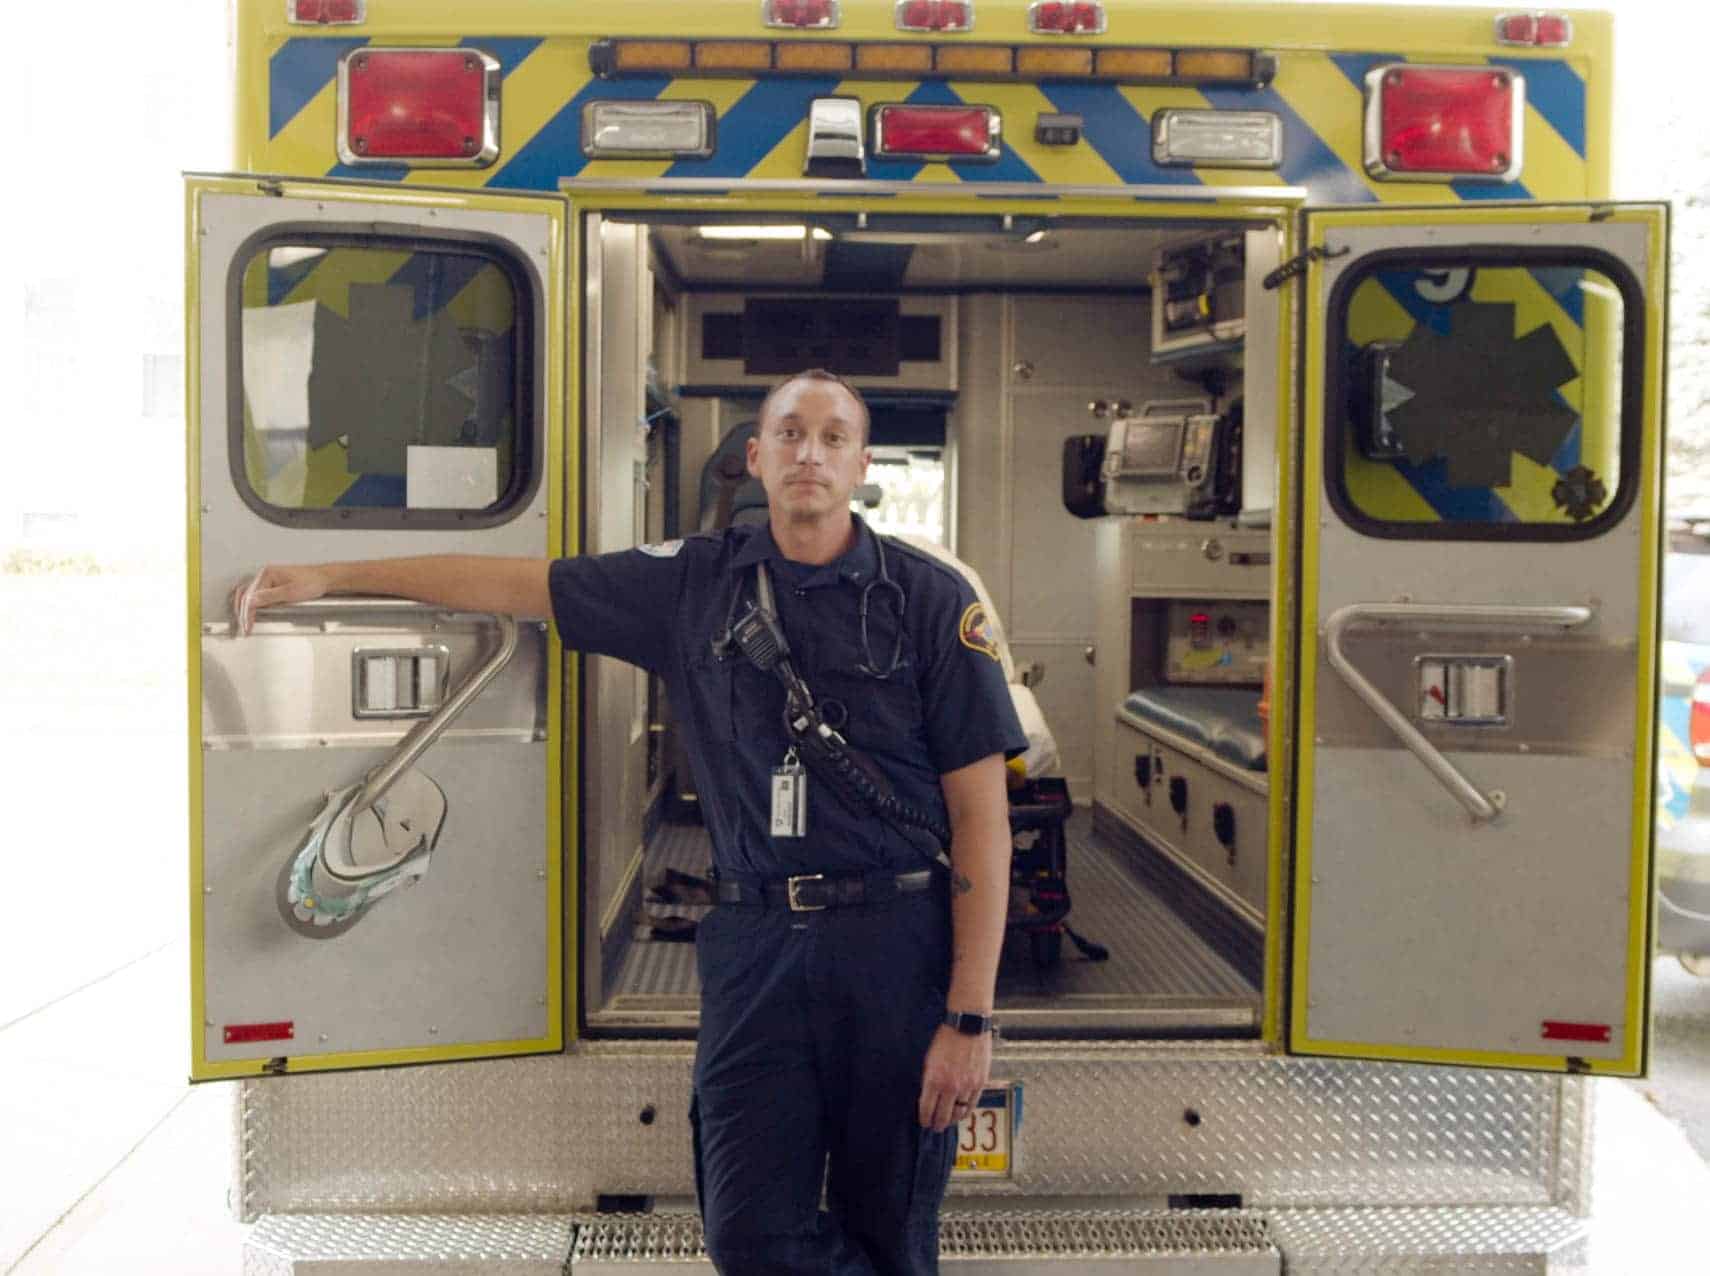 A paramedic standing in the open rear doors of an ambulance.